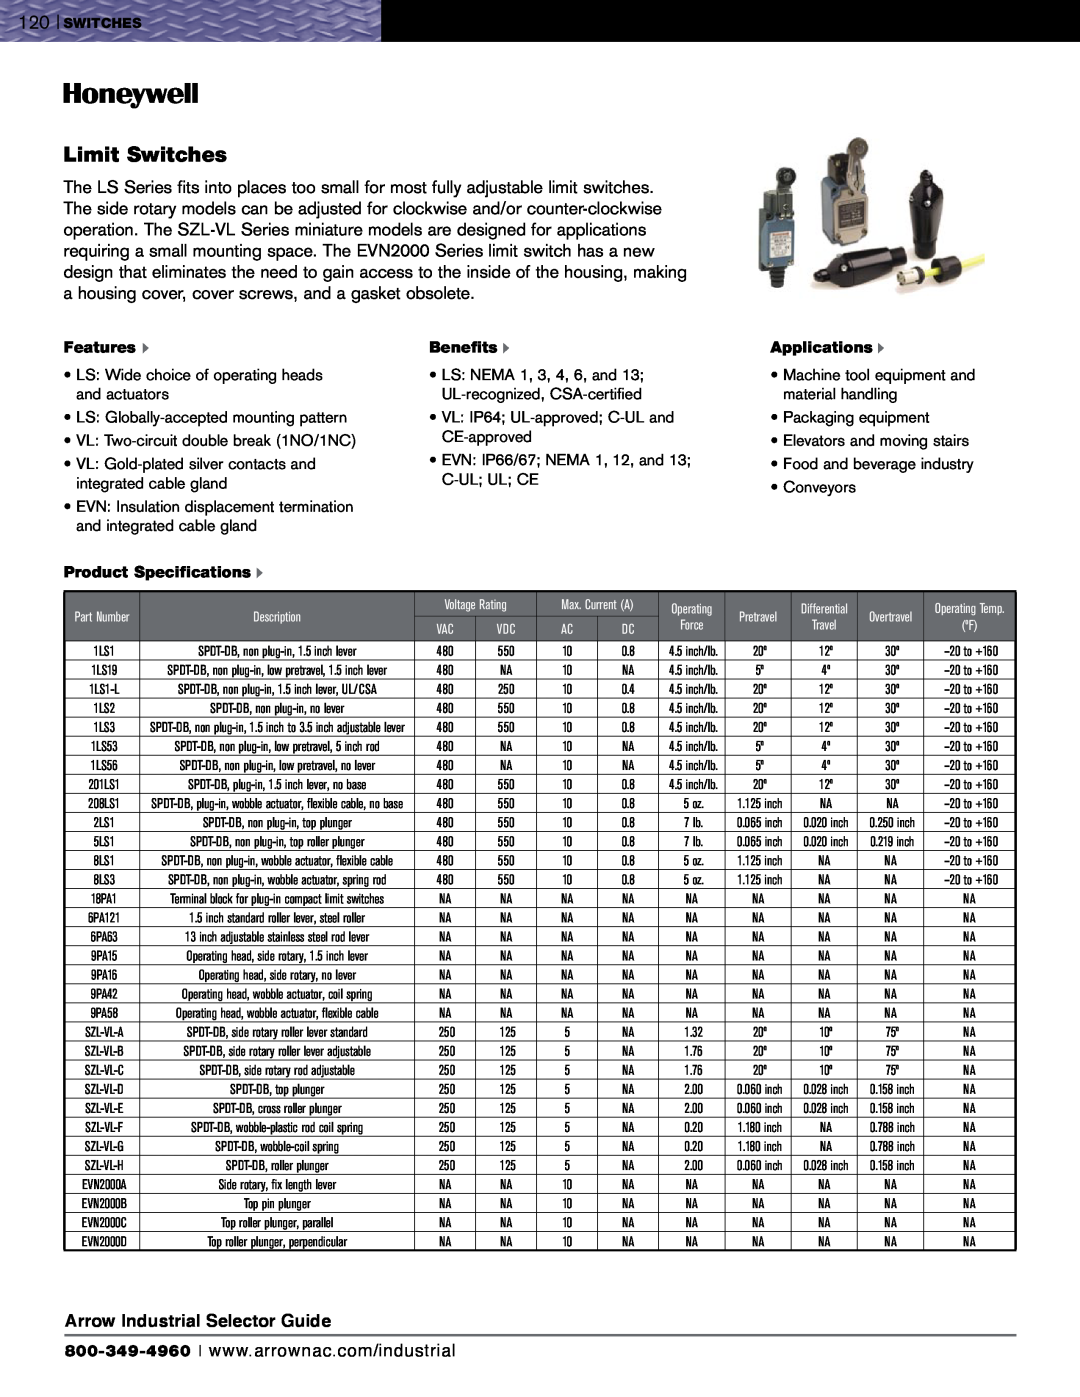 Honeywell EVN2000 Series specifications Limit Switches, Arrow Industrial Selector Guide, Features u, Benefits u 